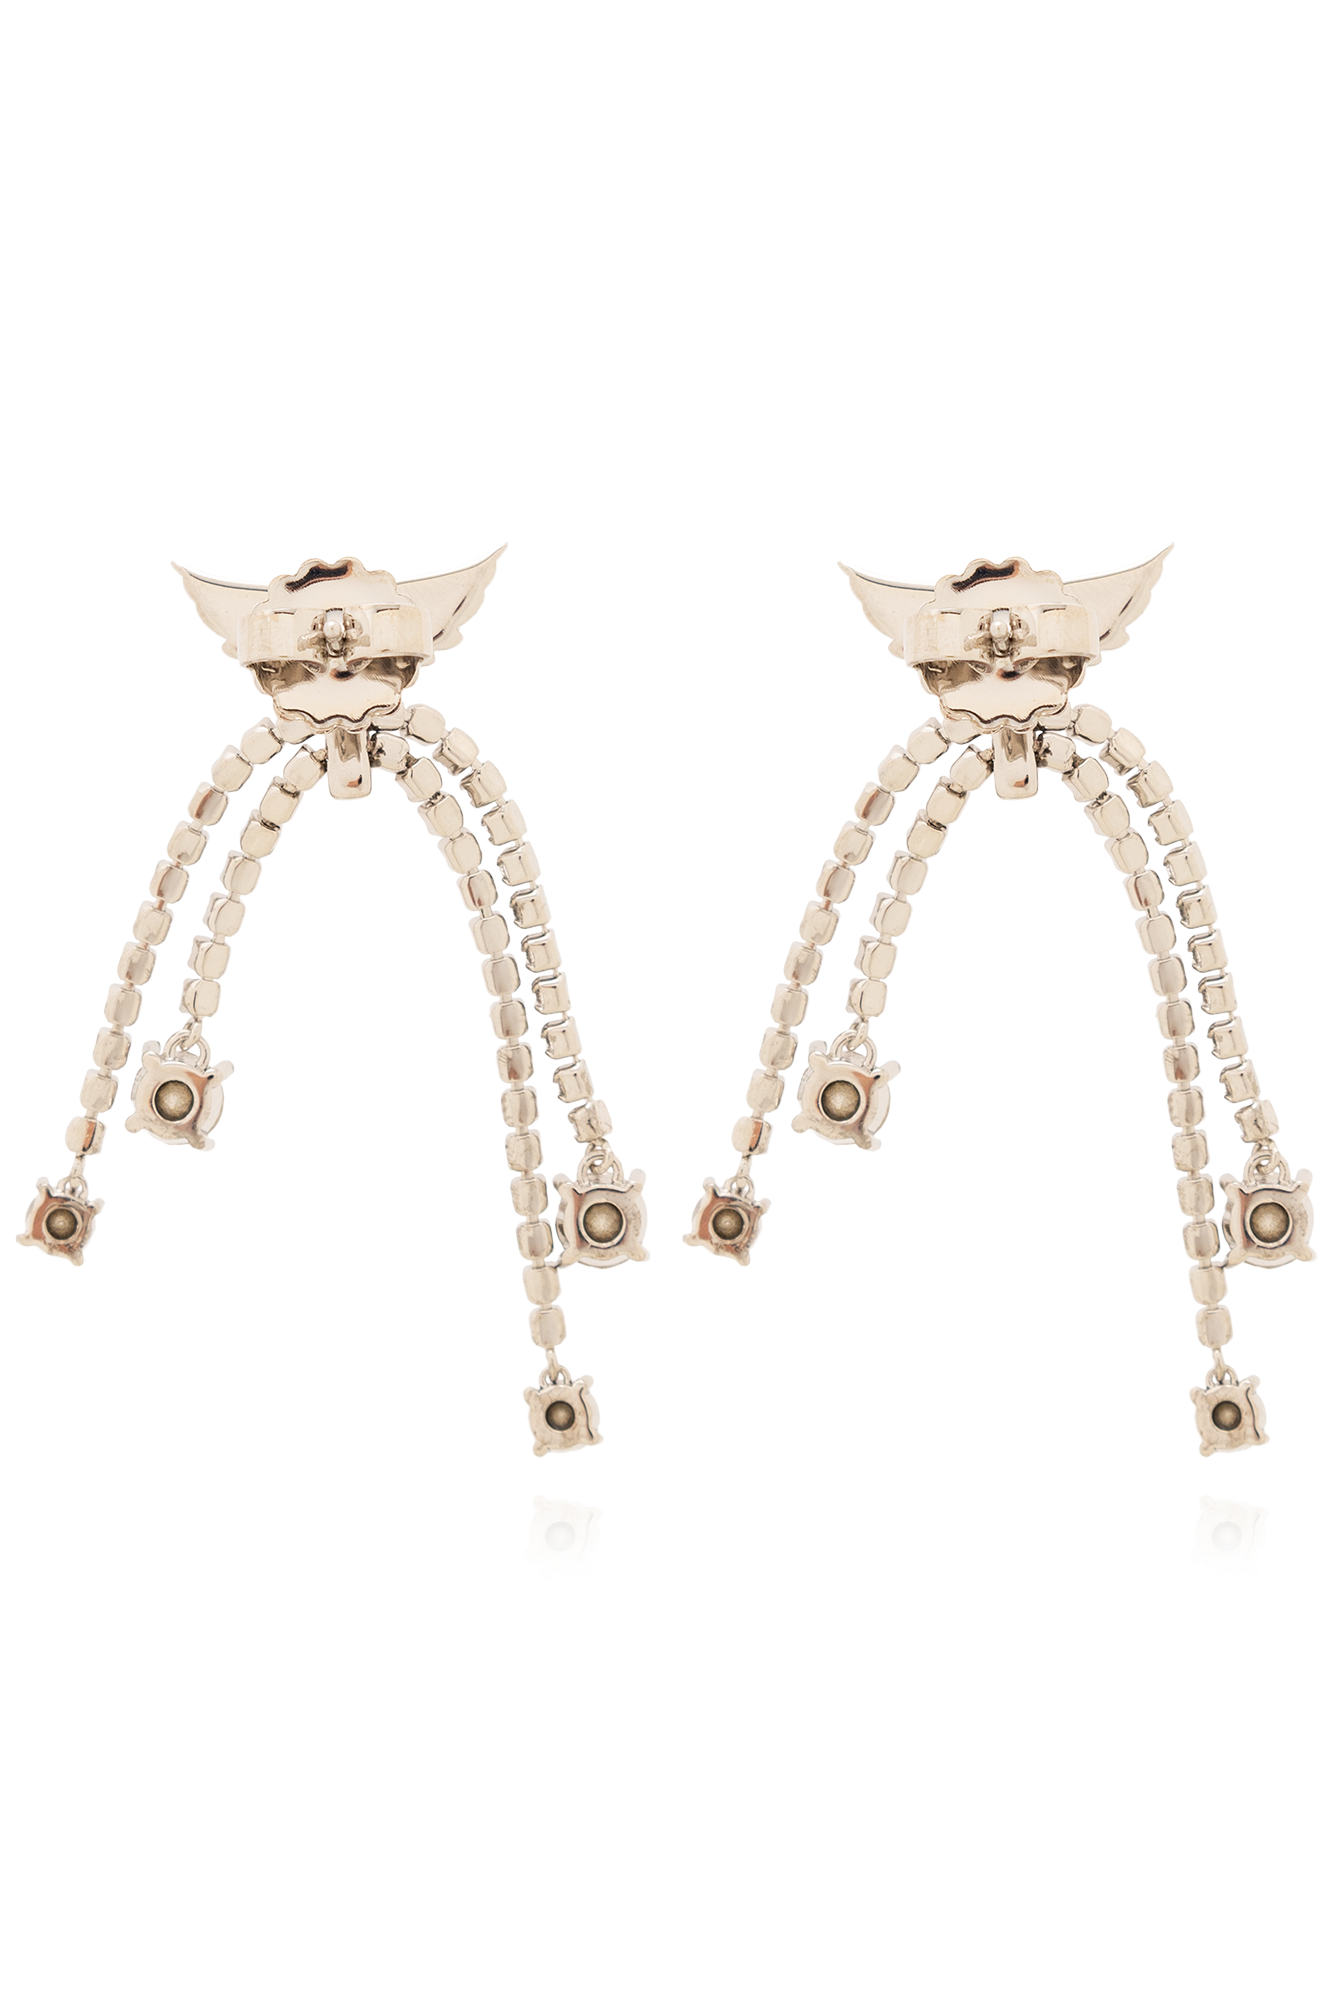 Zadig & Voltaire ‘Rock’ earrings with tassels